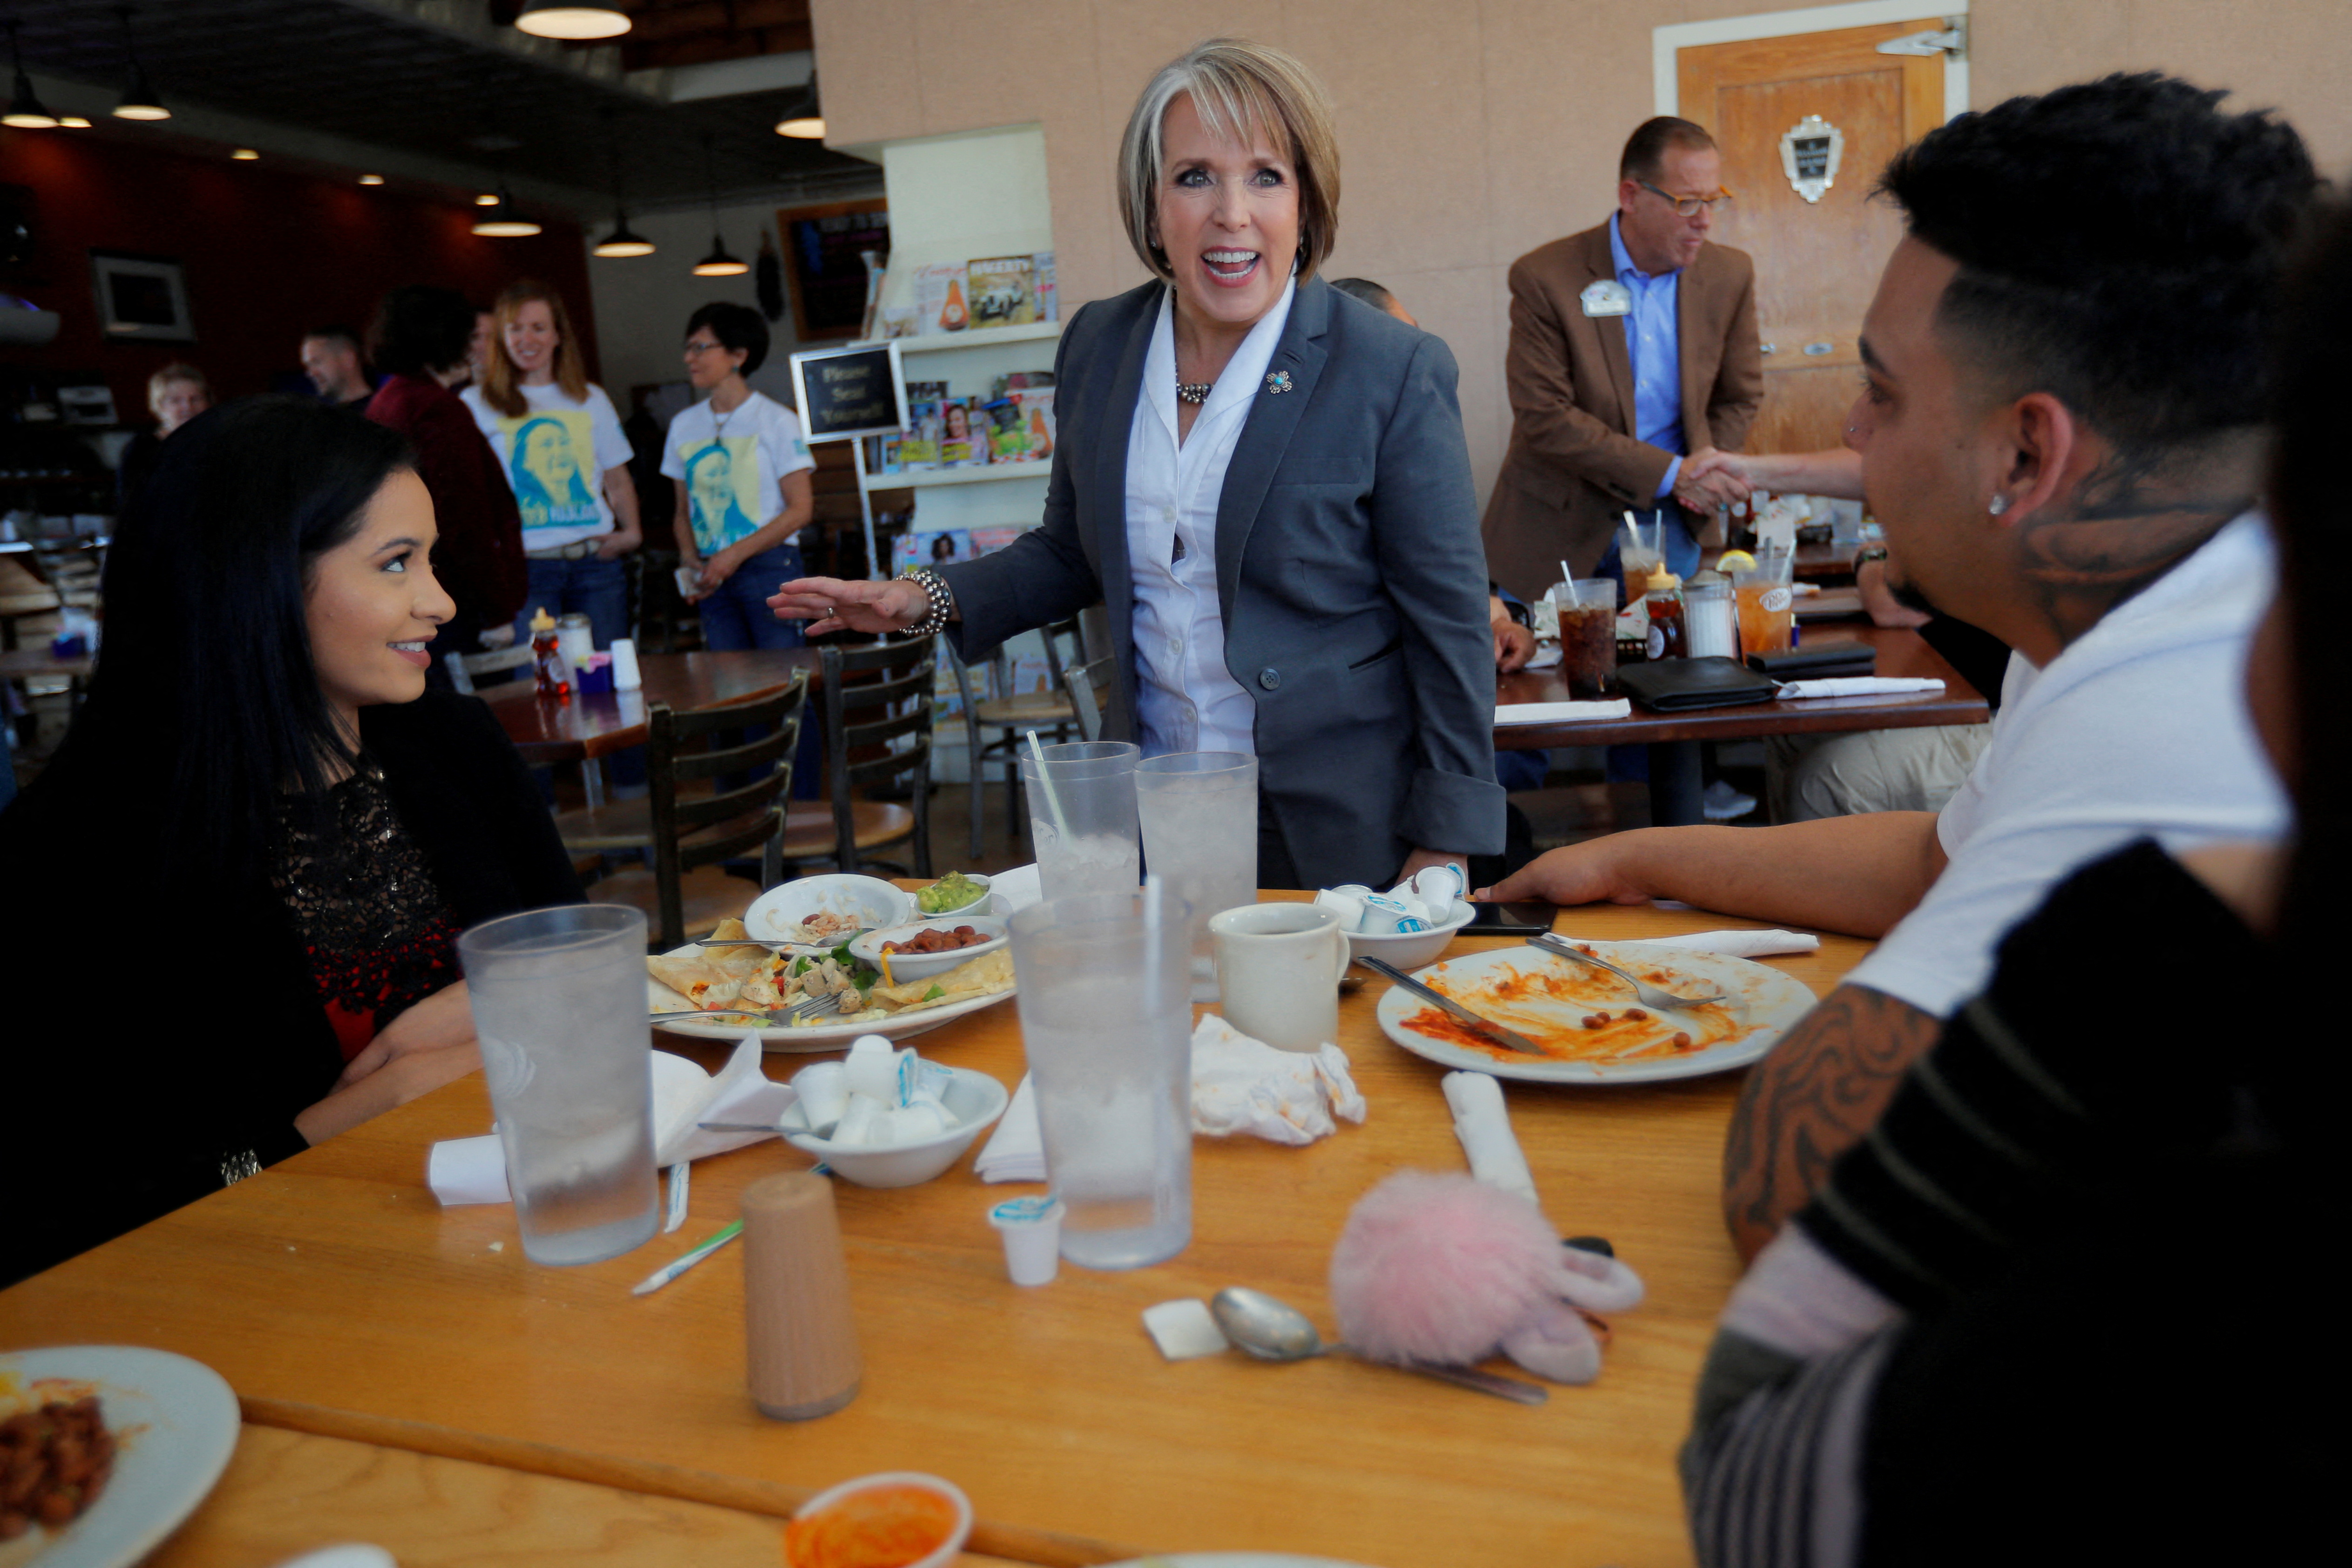 Democratic candidate for governor Michelle Lujan Grisham greets diners at Cocina Azul on midterm elections day in Albuquerque